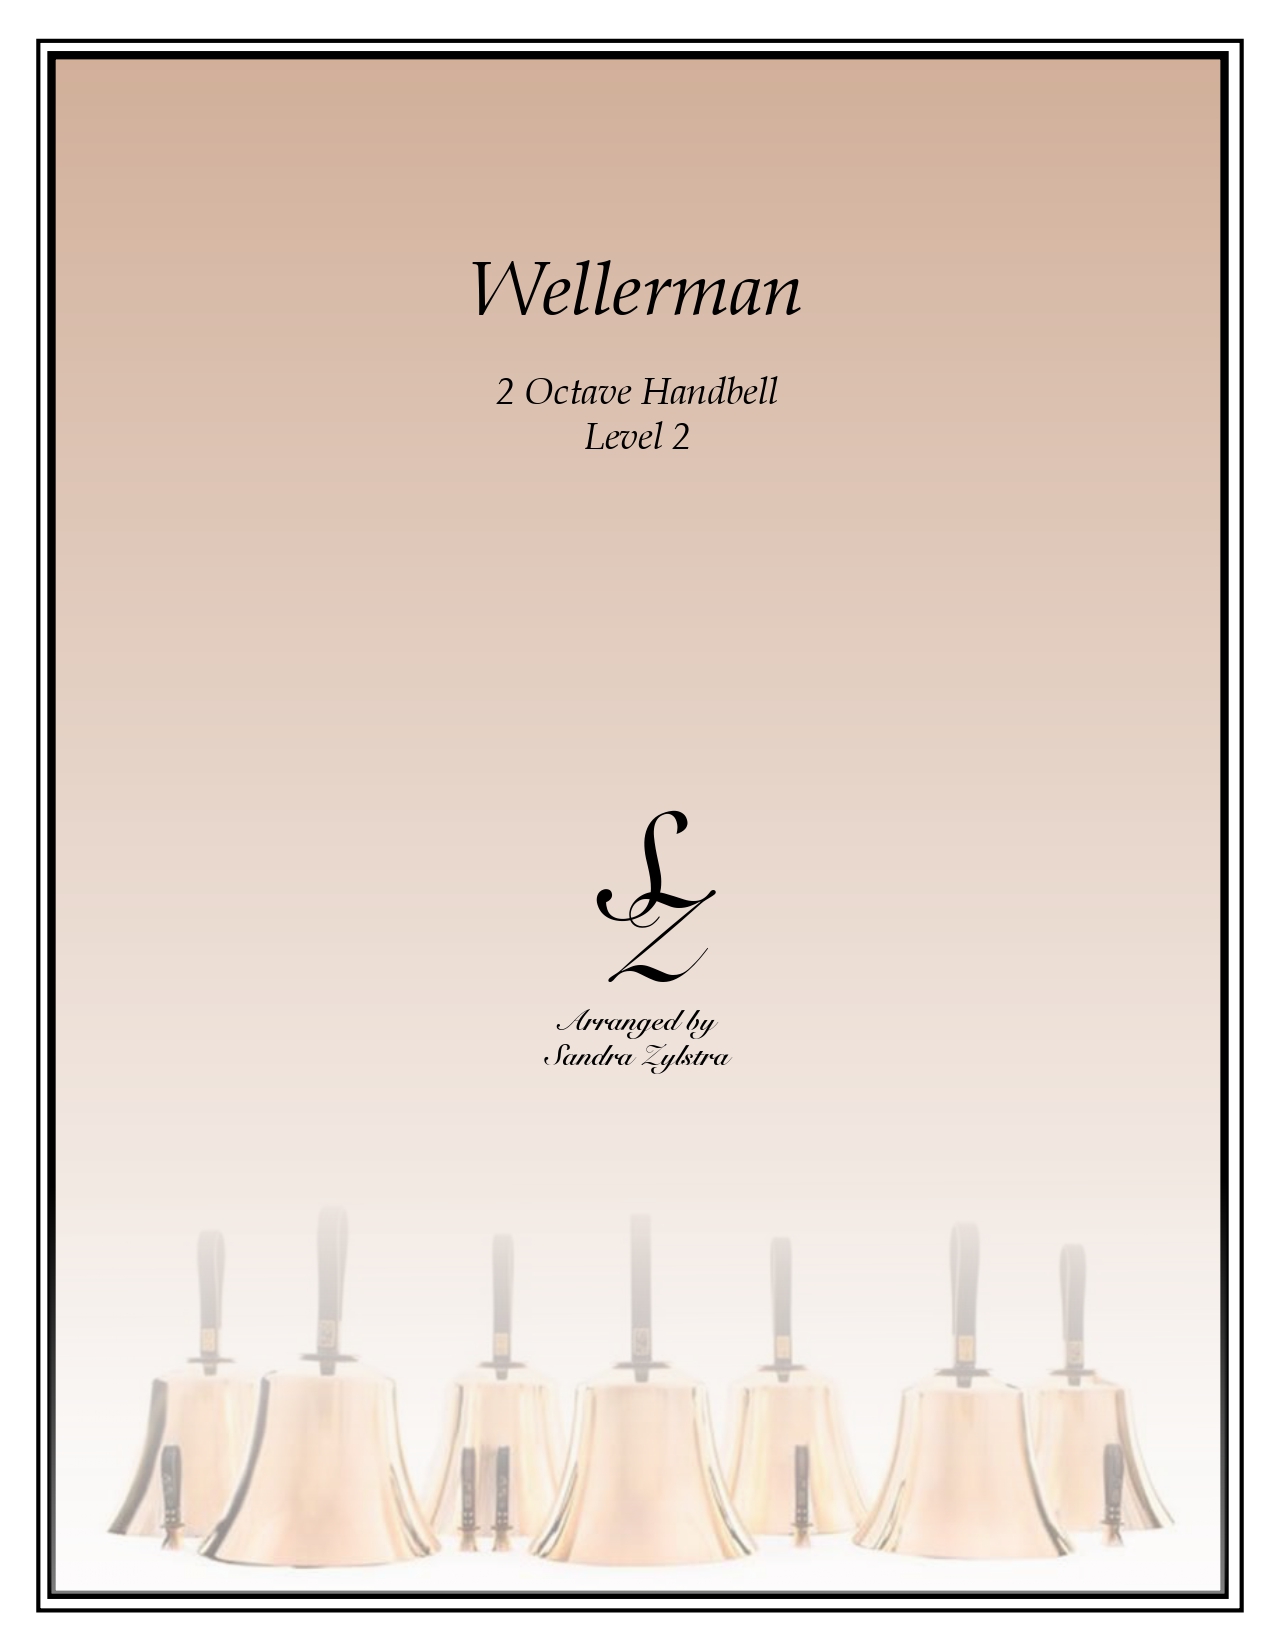 Wellerman 2 octave handbells cover page 00011